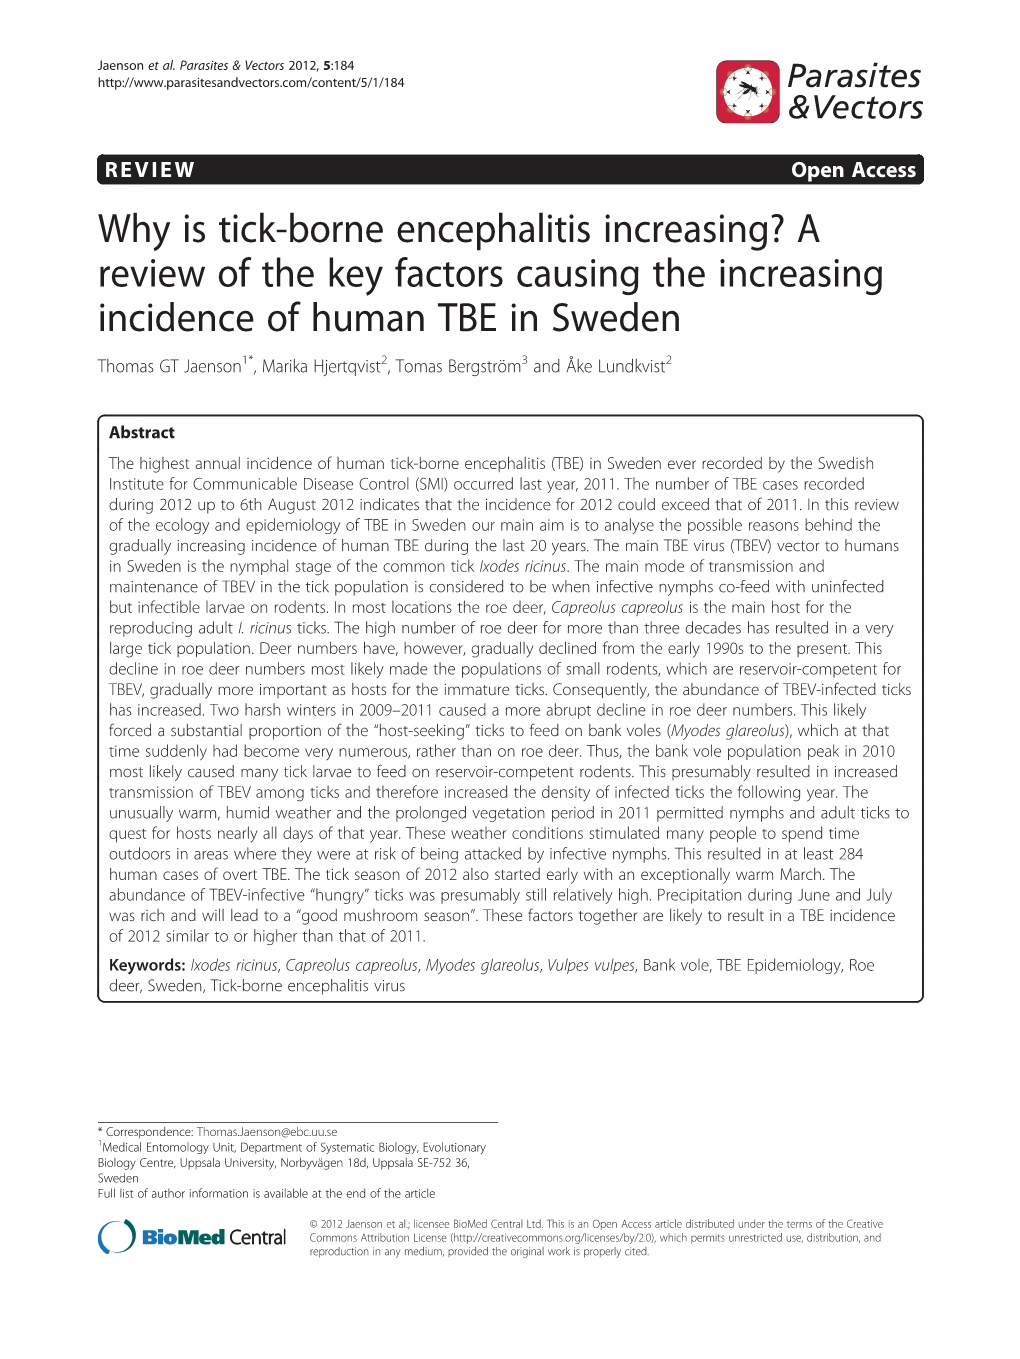 Incidence of Human TBE in Sweden Why Is Tick-Borne Encephalitis Increasing?